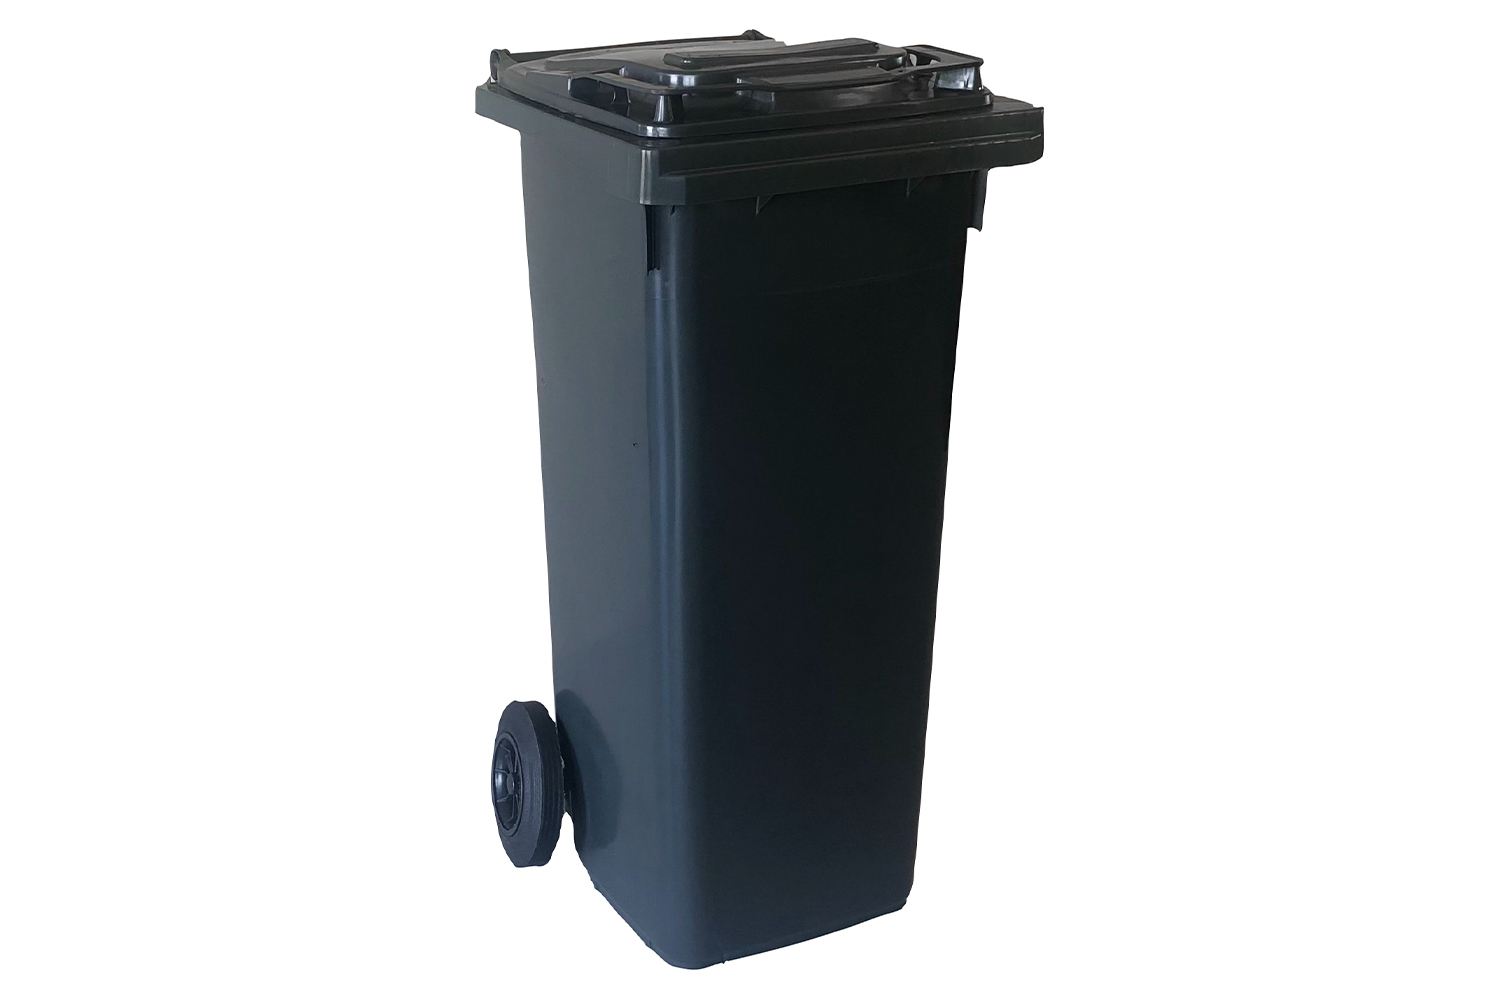 Waste bins, containers